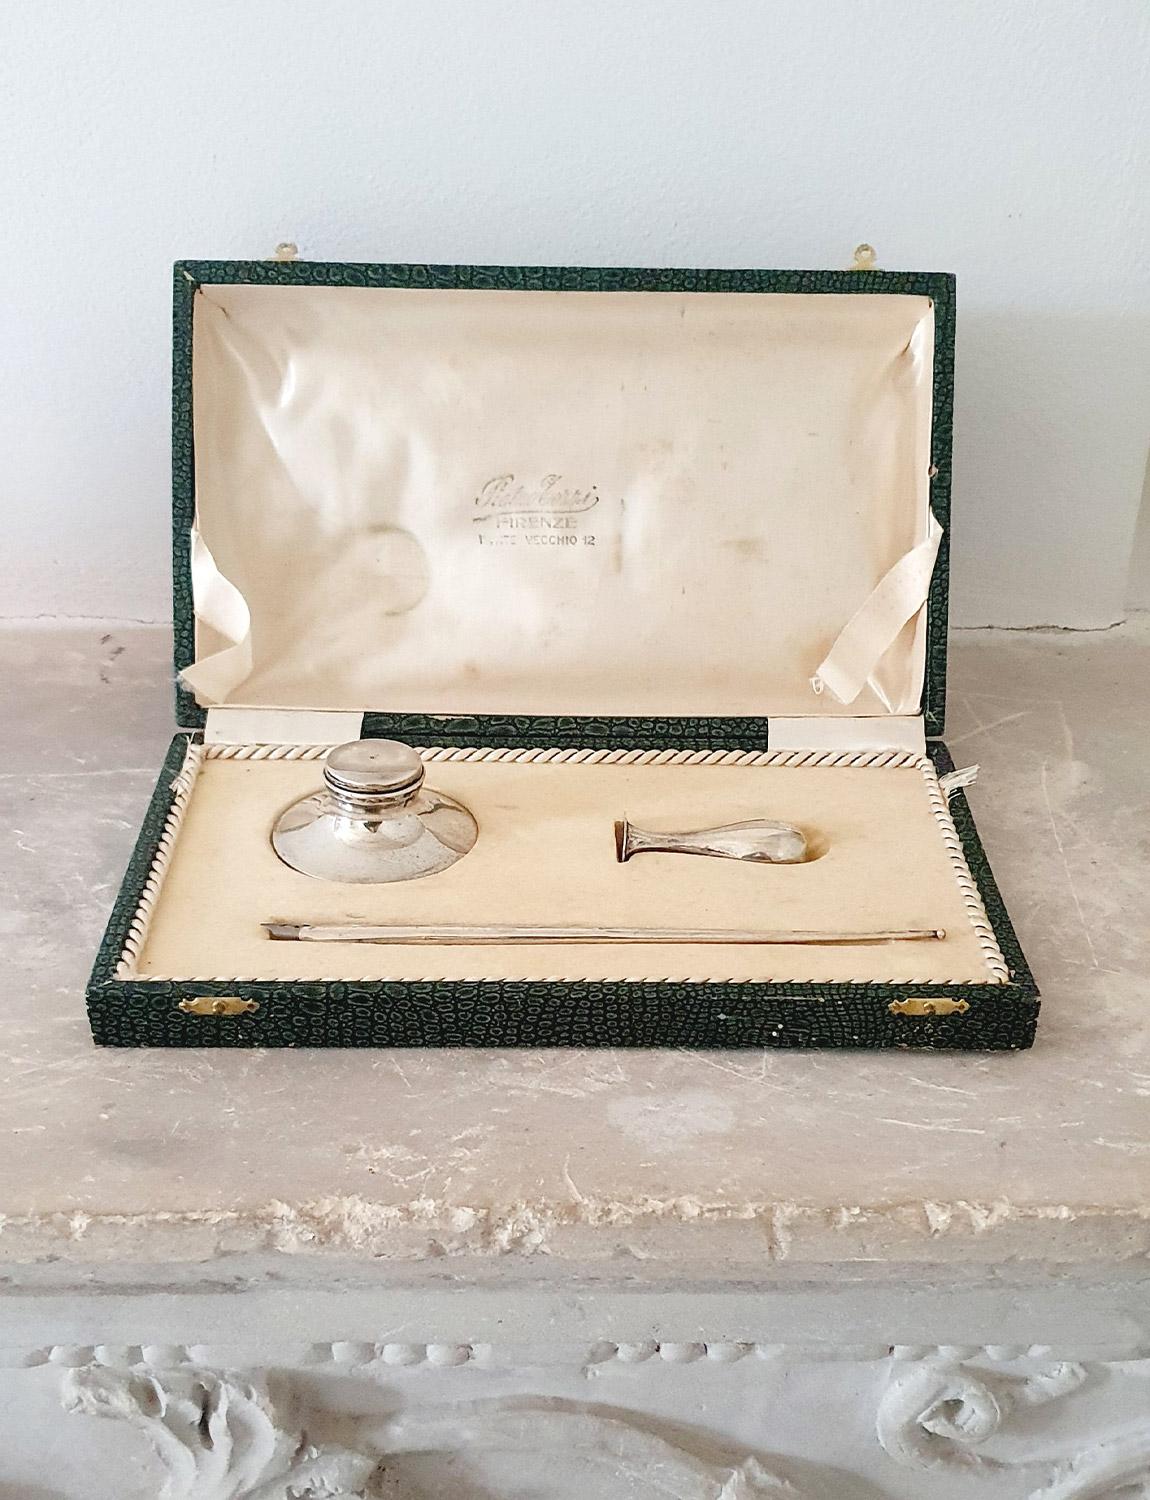 A hand crafted solid silver writing set originally sold by the silversmith, Rebbio Corri at number 12 Ponte Vecchio. The set consists of a silver inkwell (with minute glass inlay to hold ink), a fountain pen with removable nib and a silver stamp for